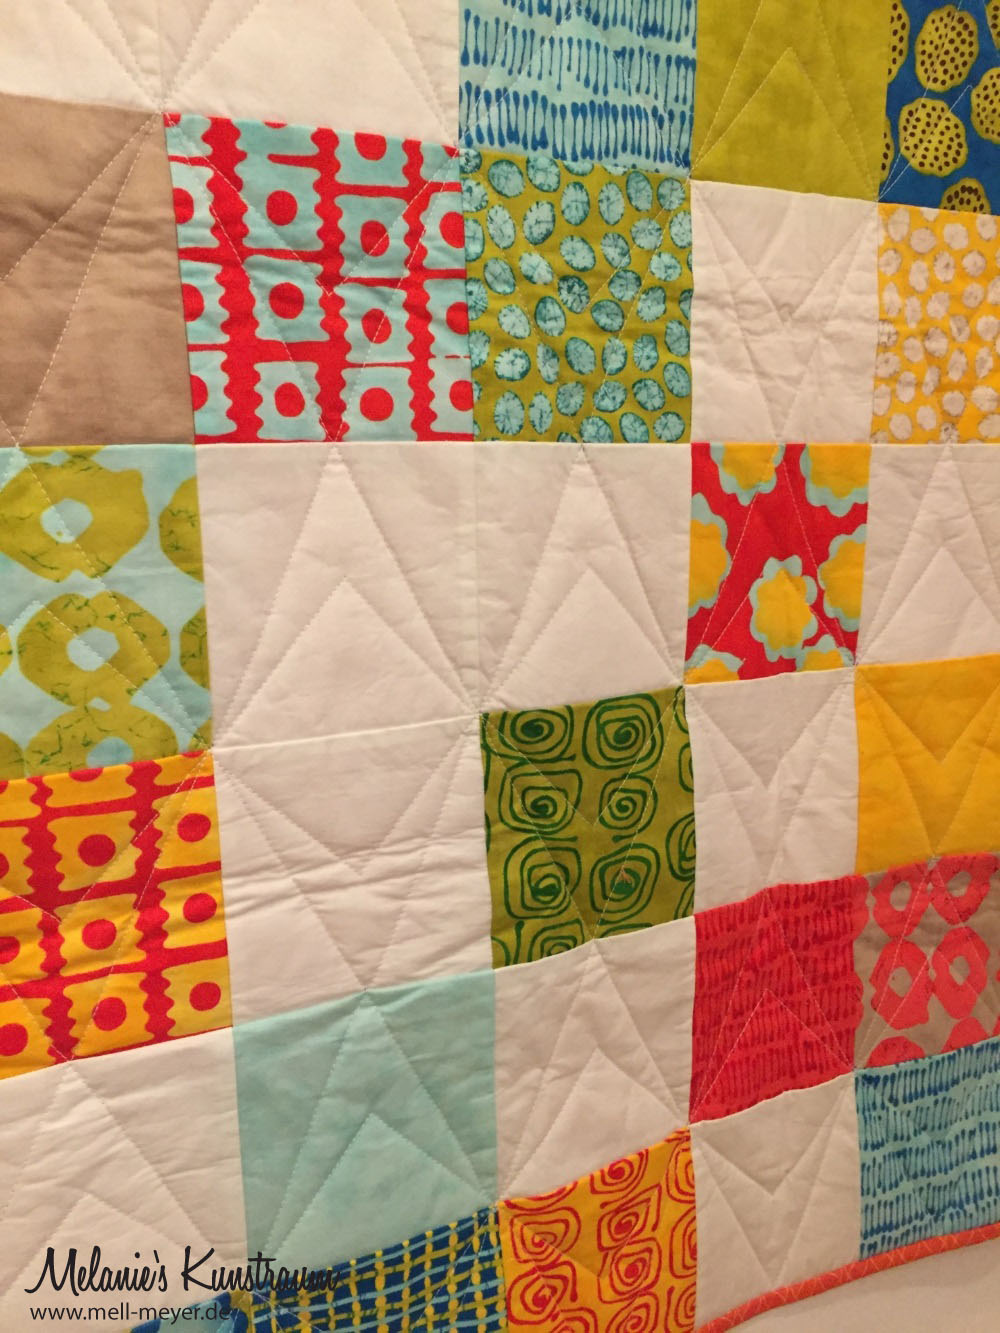 Charity Quilt No. 3 "From Outside In" |mell-meyer.de